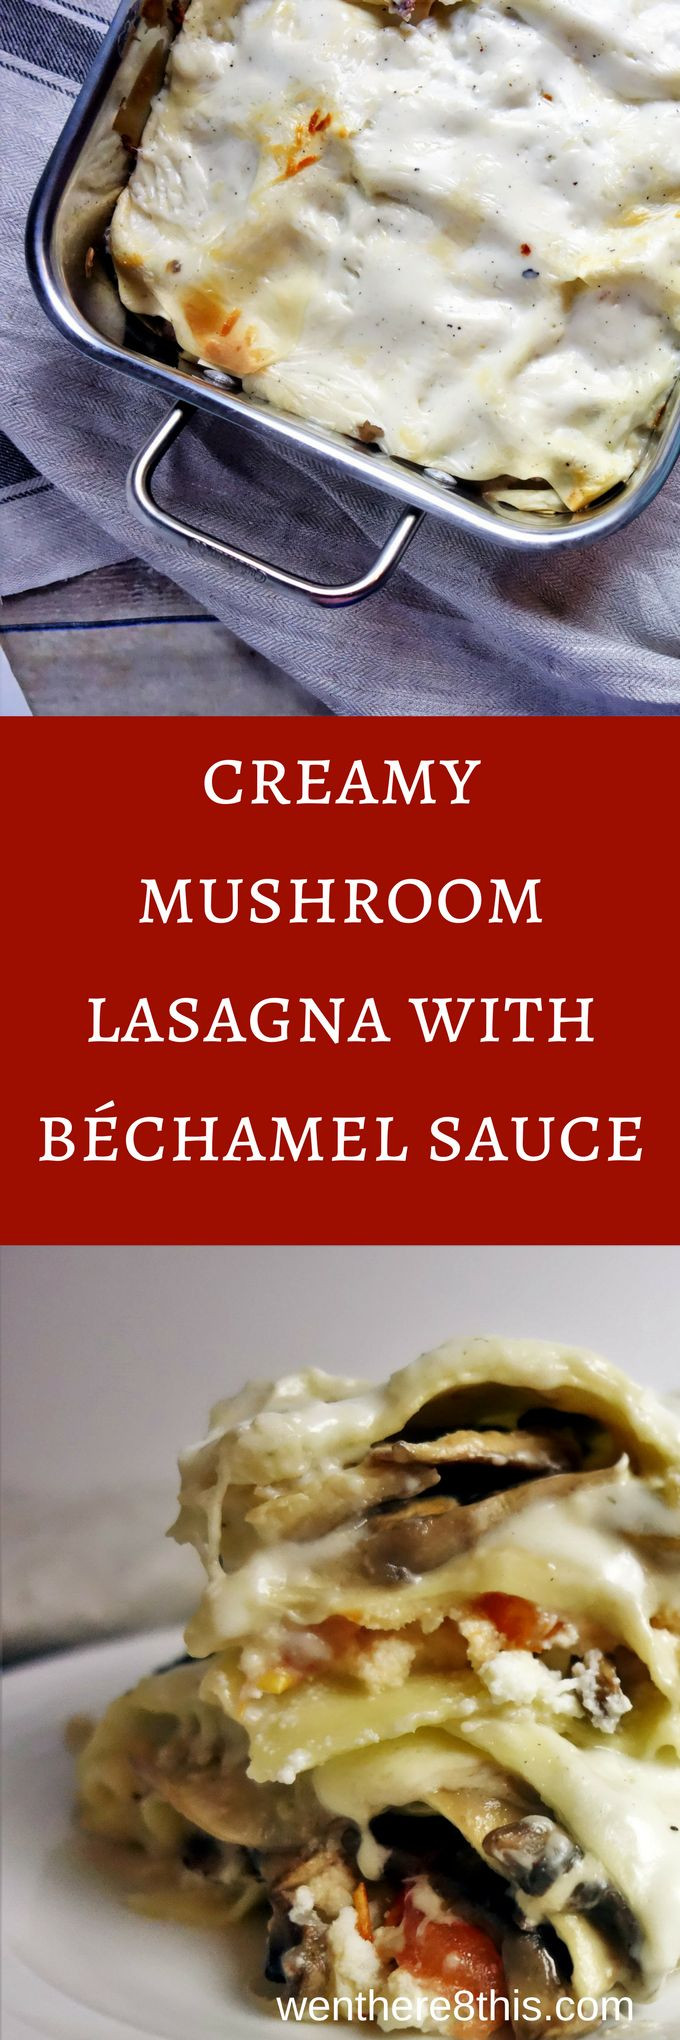 30 Ideas for Mushroom Lasagna Bechamel - Best Recipes Ideas and Collections